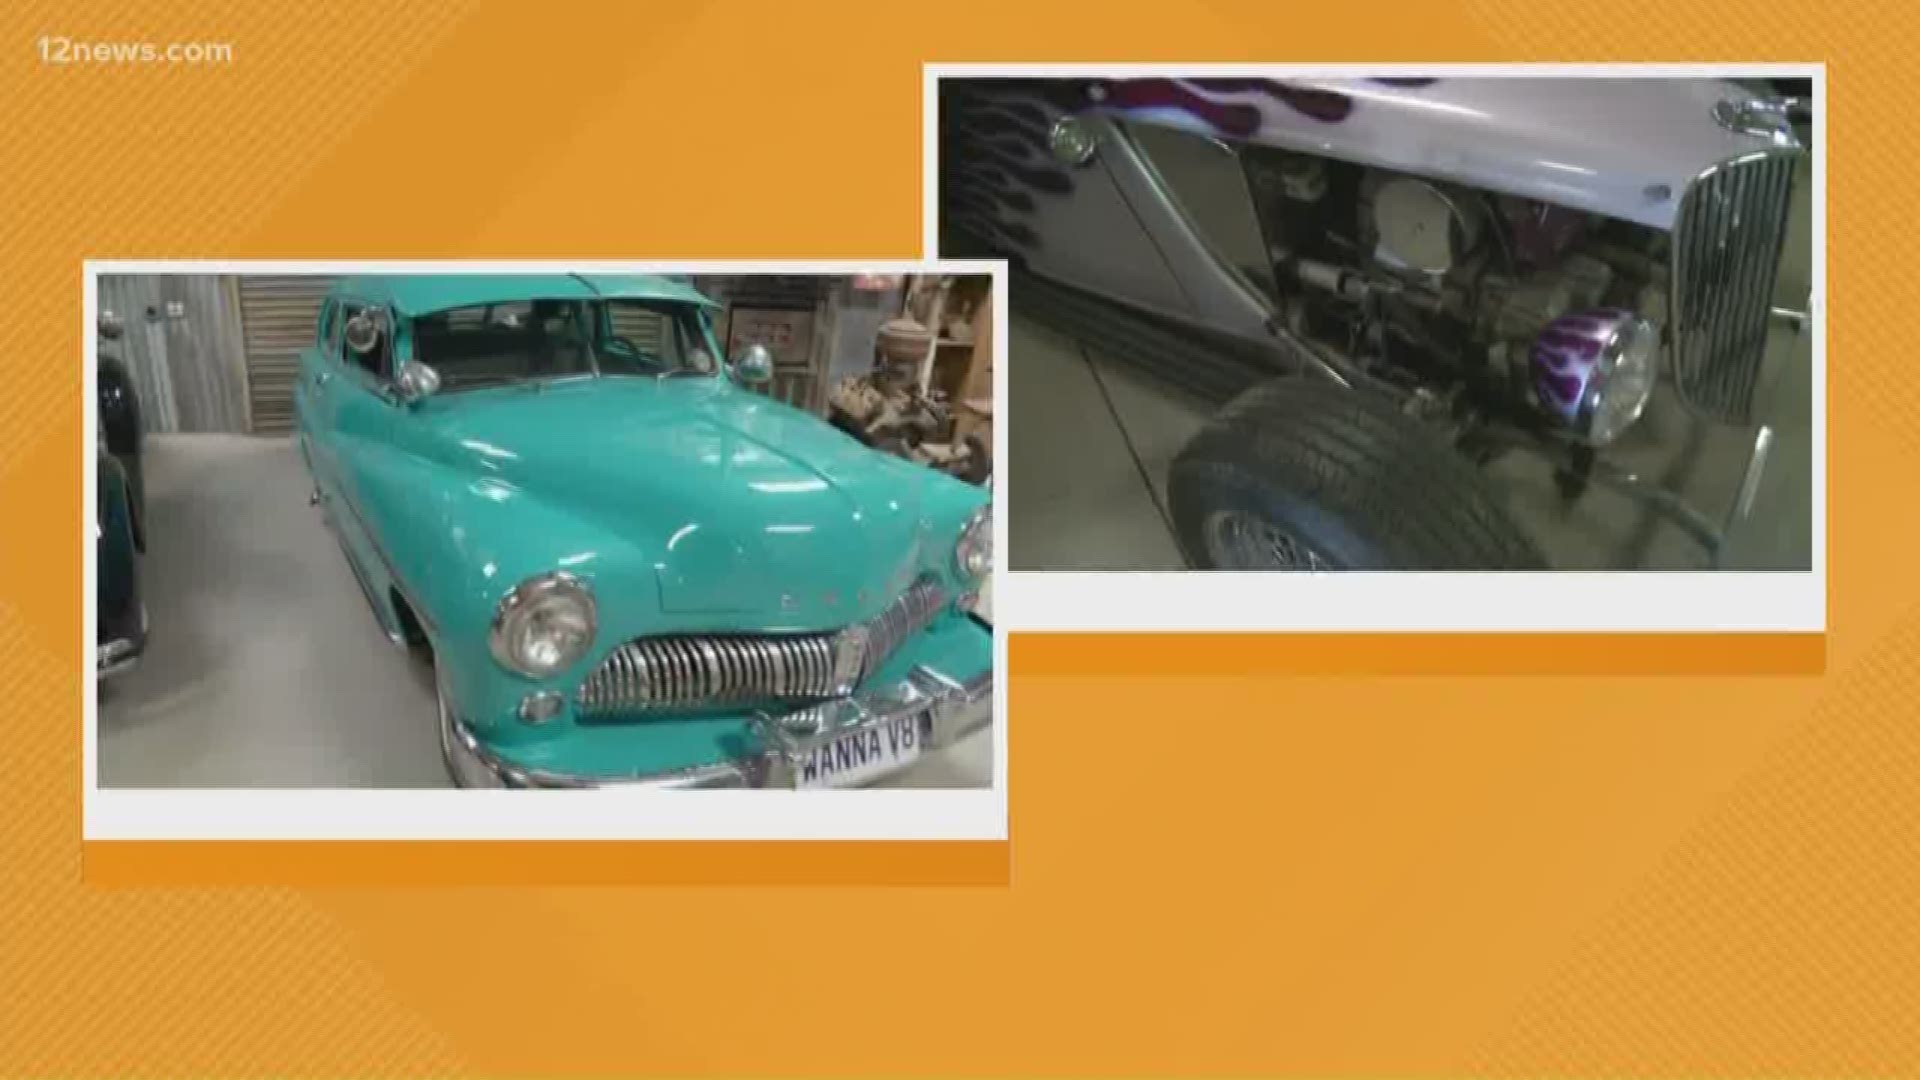 If you love cars there's one stop you have to make south of Maricopa at the Dwarf Car Museum.